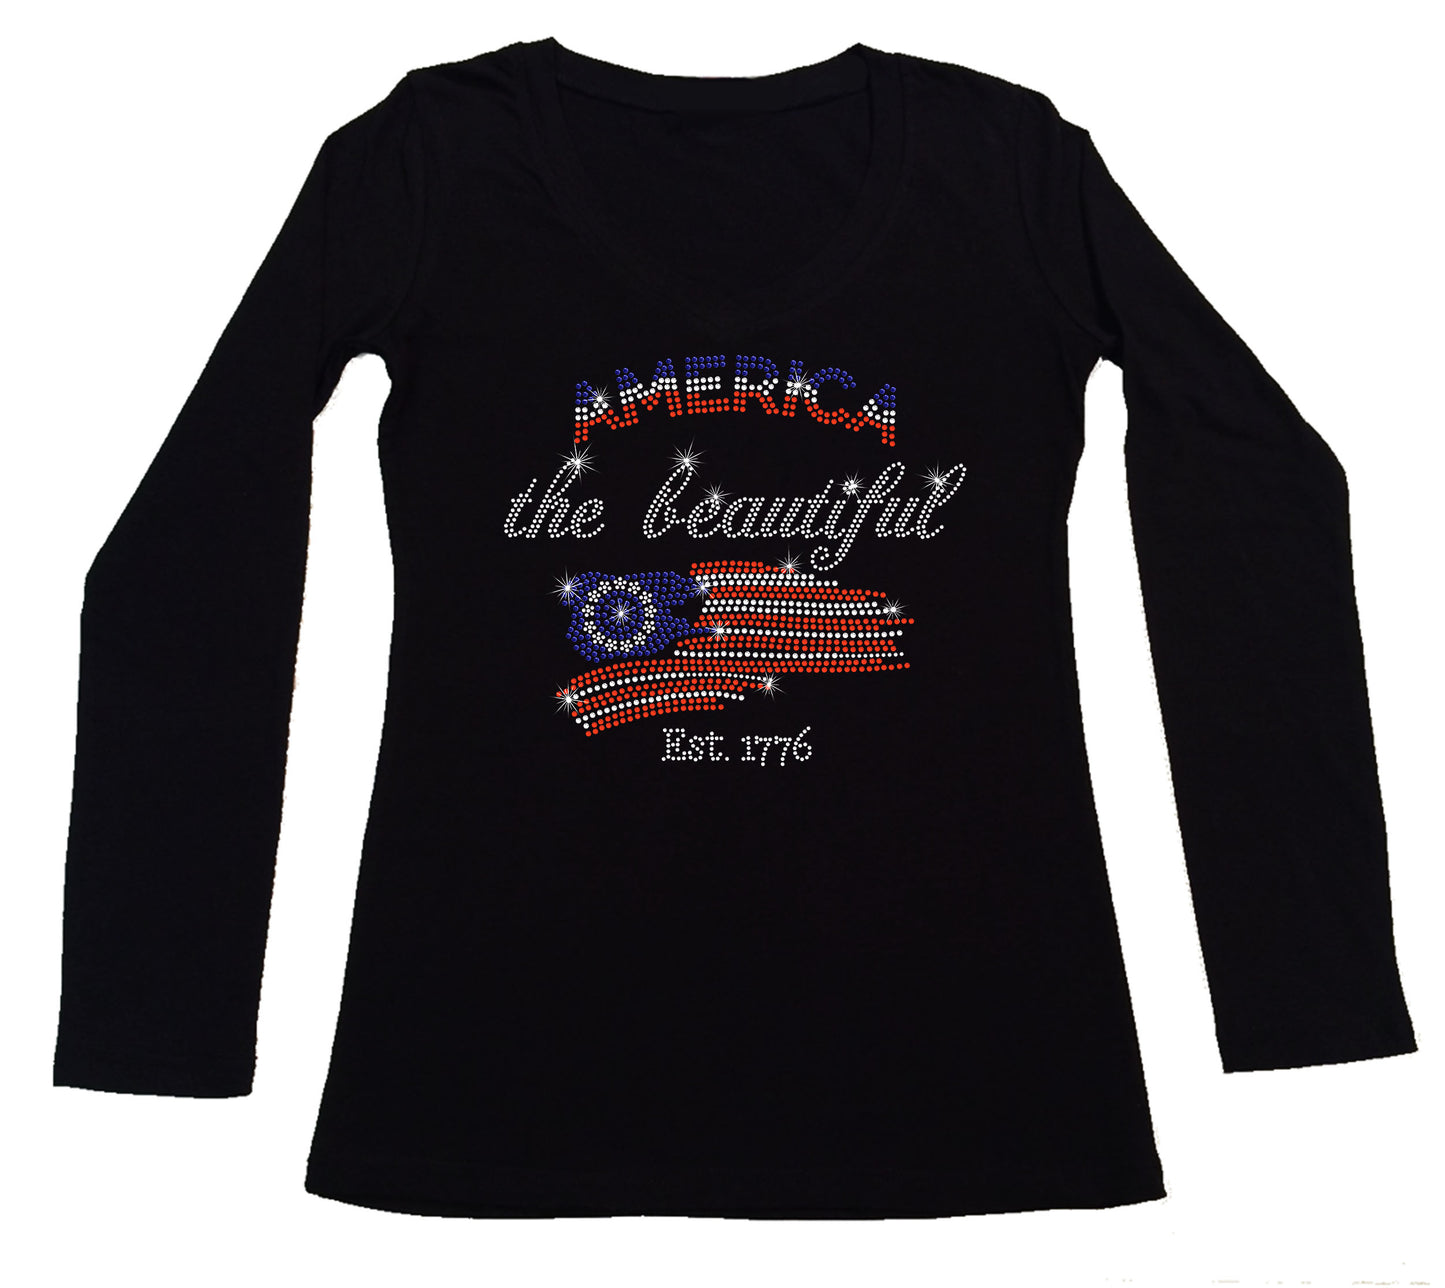 Women's Rhinestone Fitted Tight Snug America The Beautiful - in Red, White & Blue, Patriotic Shirt, 4th of July Shirt